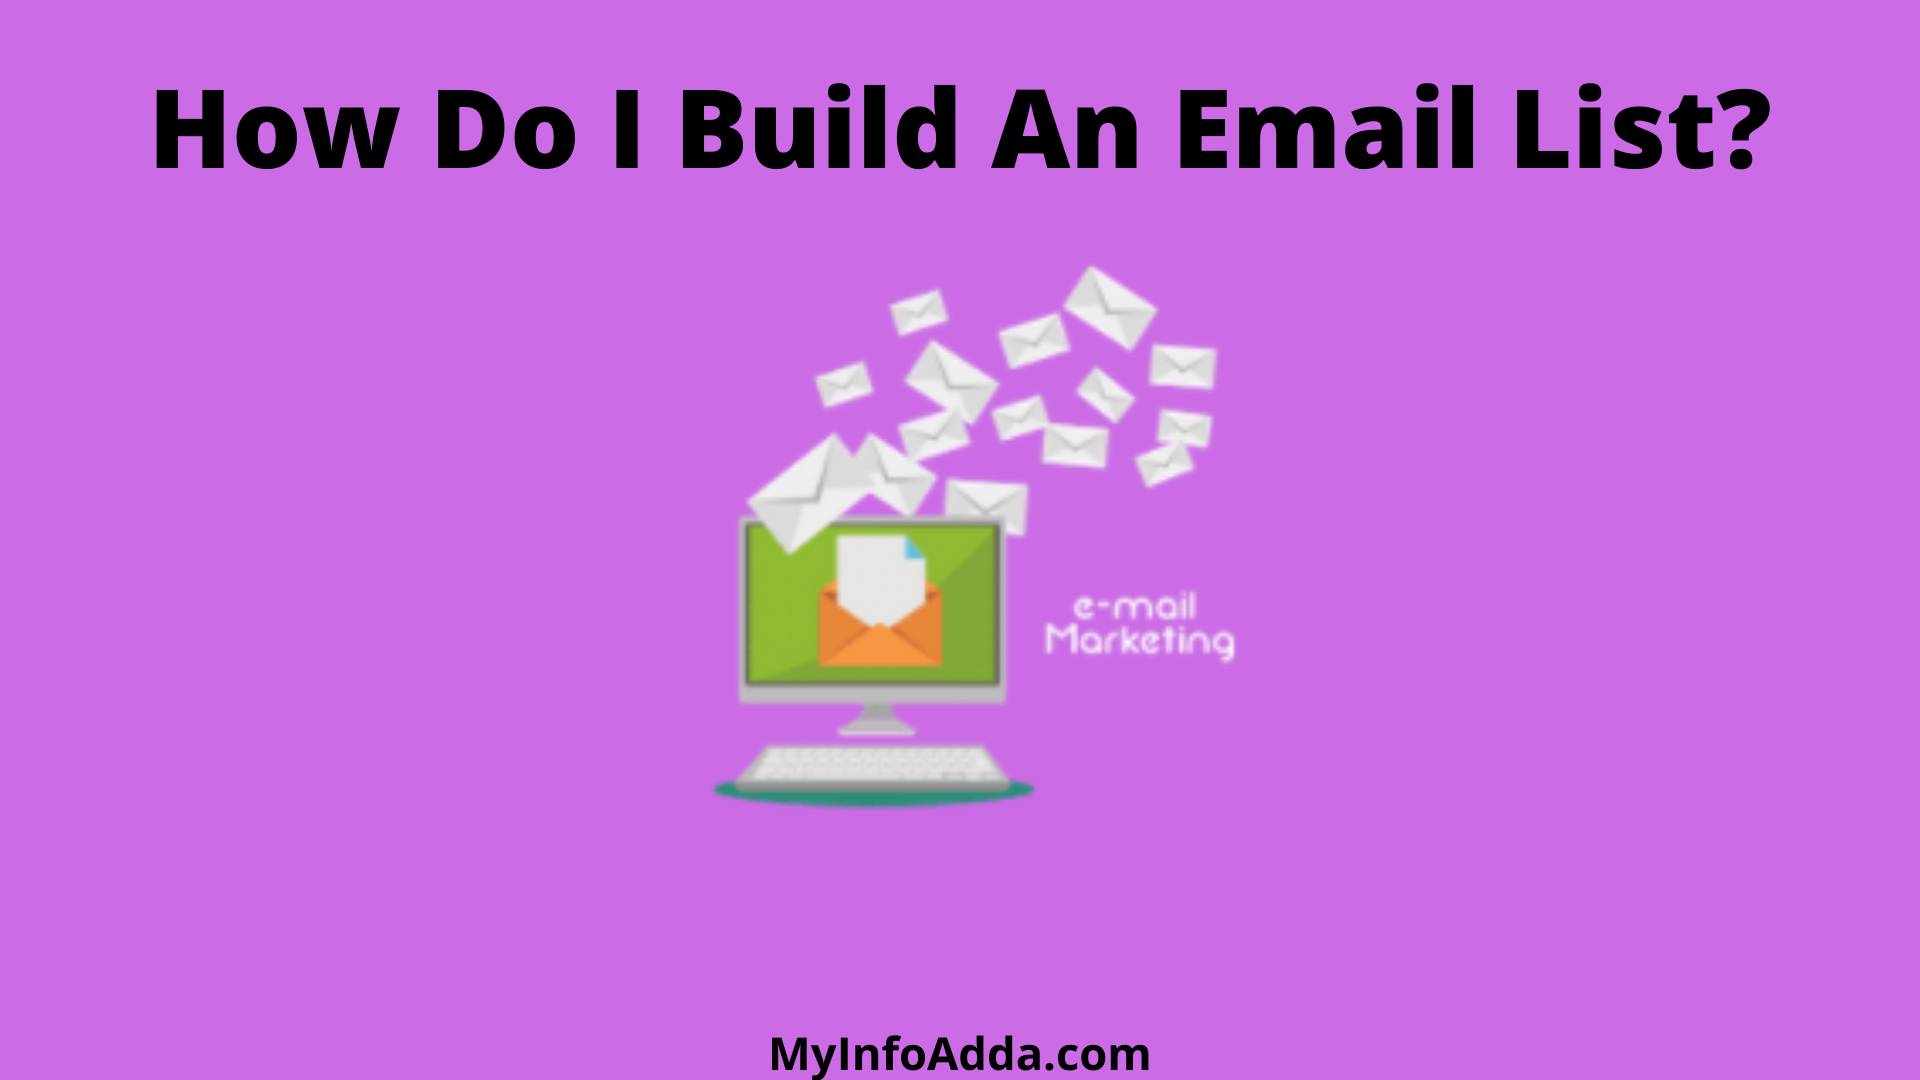 How Do I Build An Email List? How Can It Help Me?